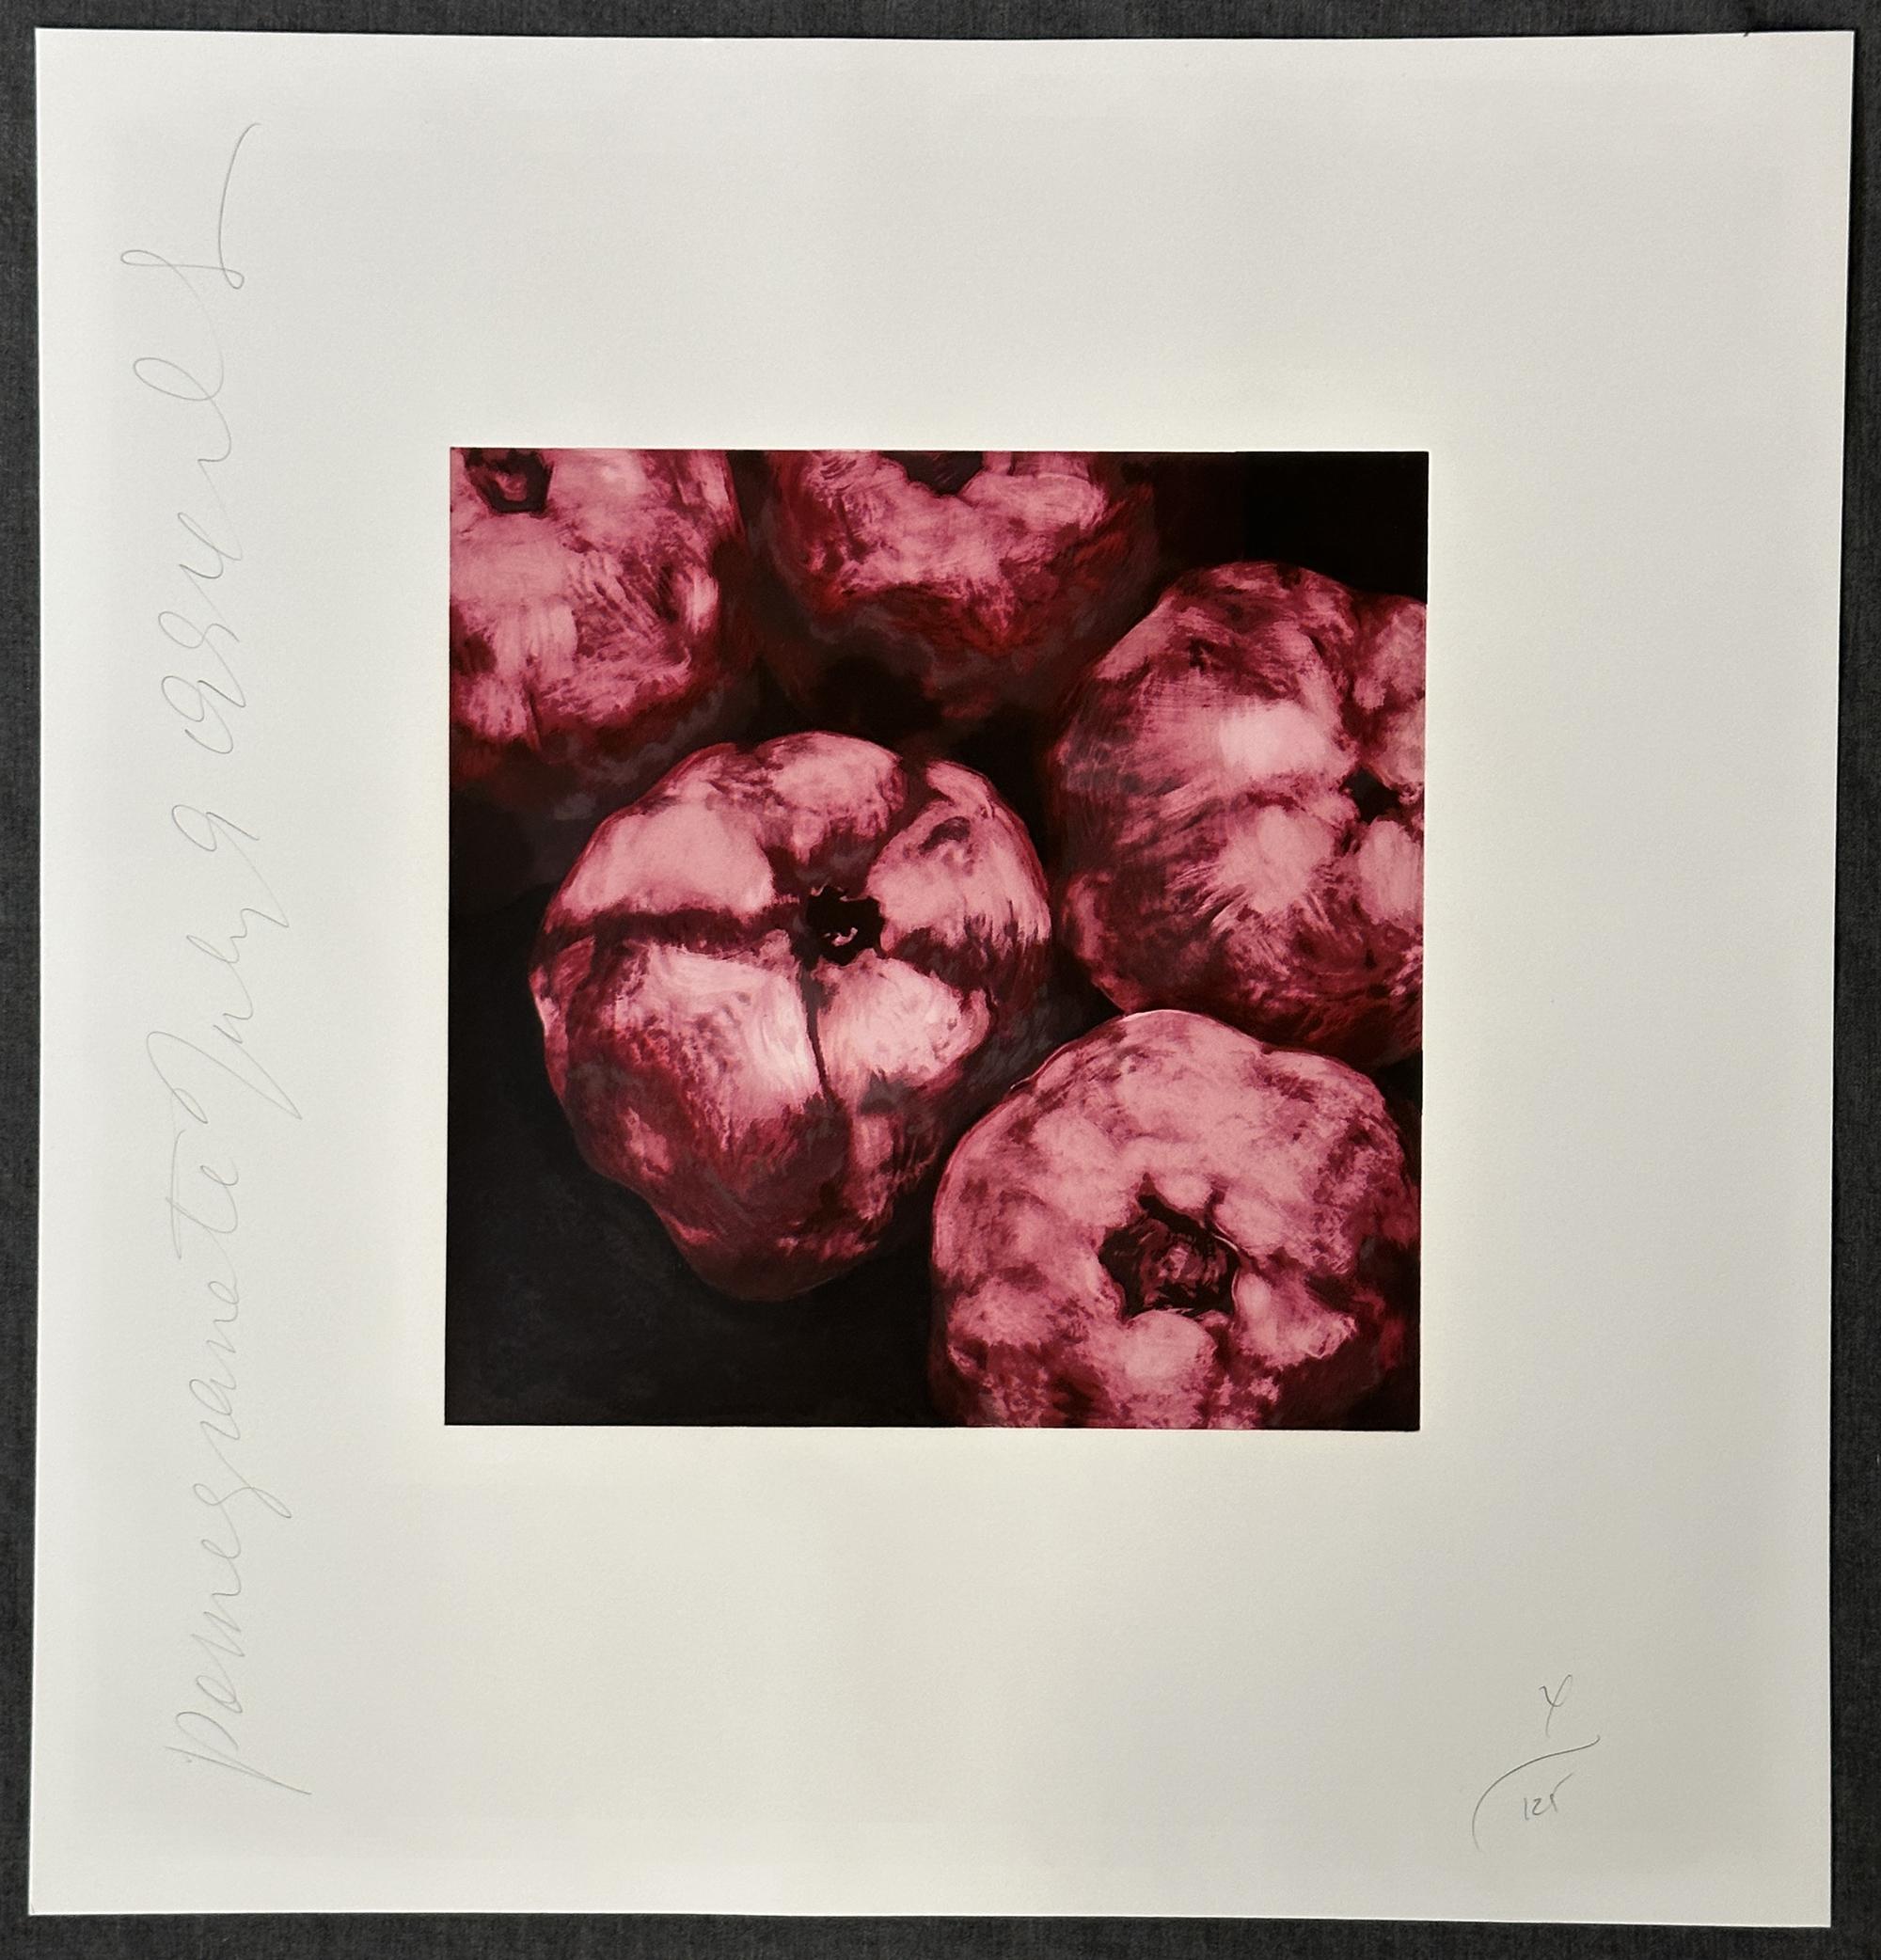 Pomegranates 1994 Signed Limited Edition Silkscreen - Print by Donald Sultan